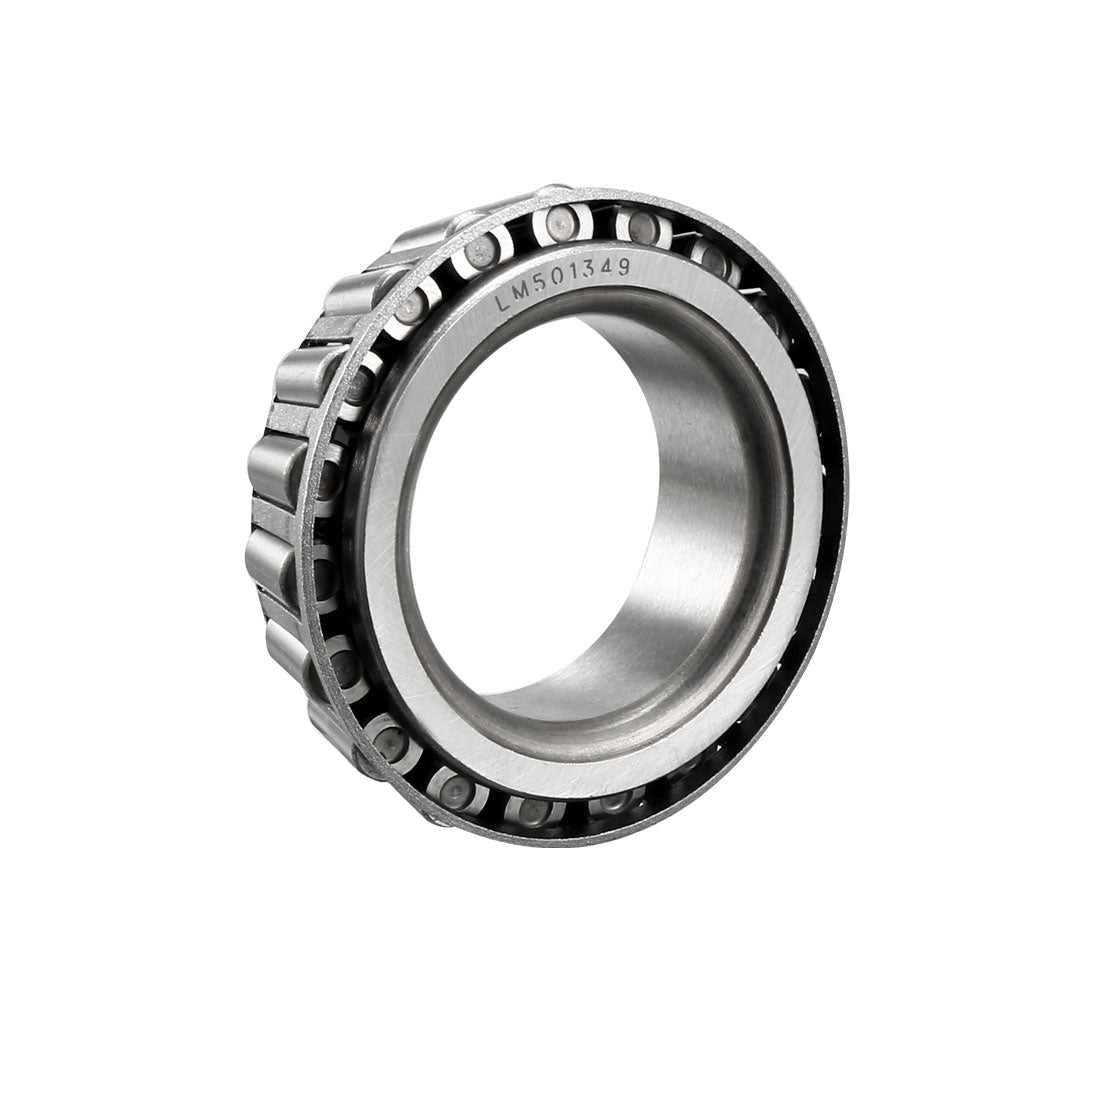 Uxcell Uxcell LM11749 Tapered Roller Bearing Single Cone 0.6875" Bore 0.575" Width 2pcs